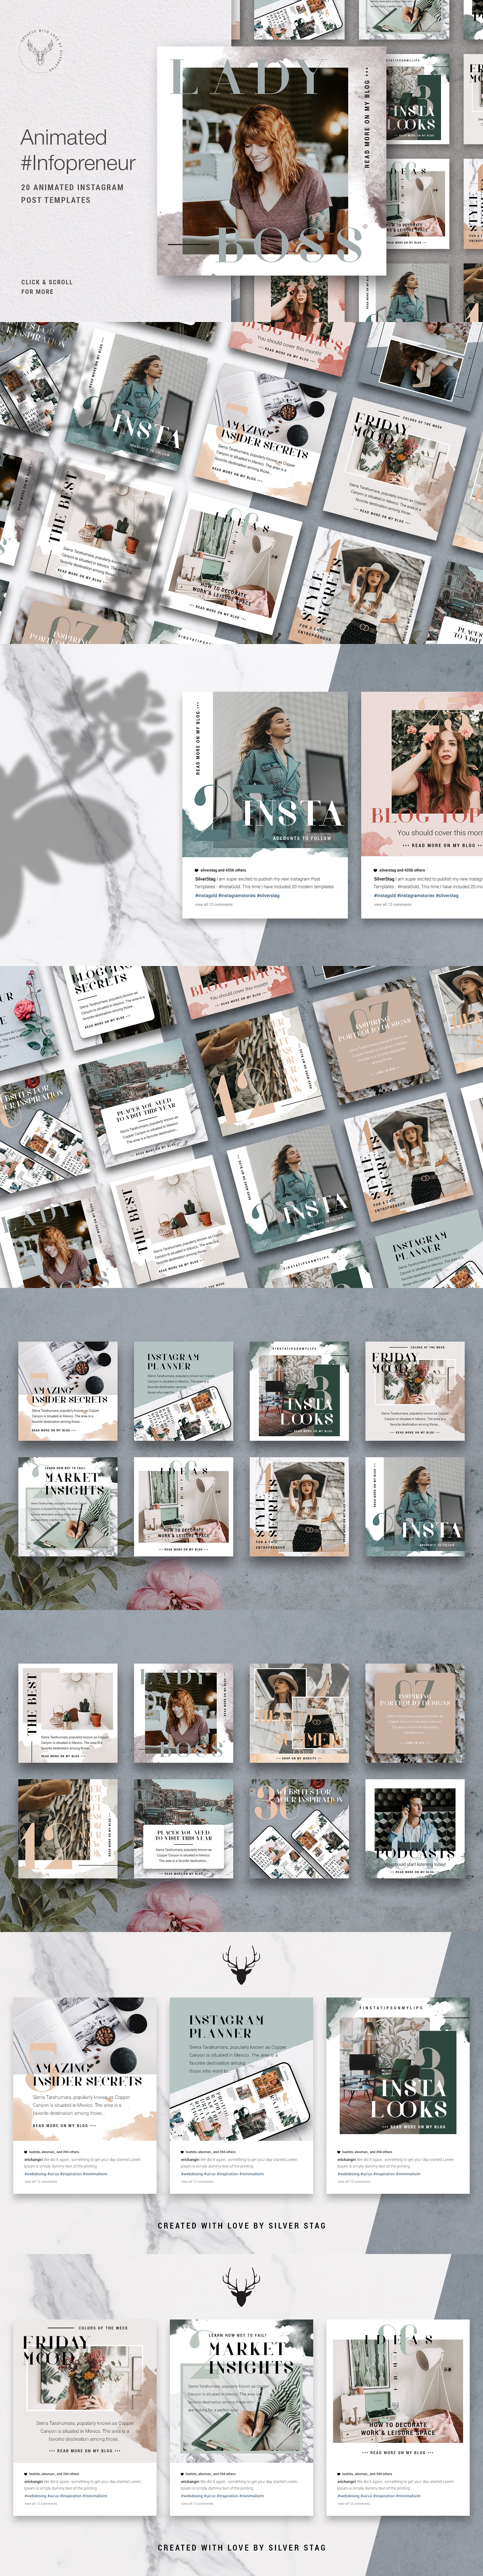 03 infopreneur animated post and story templates 656